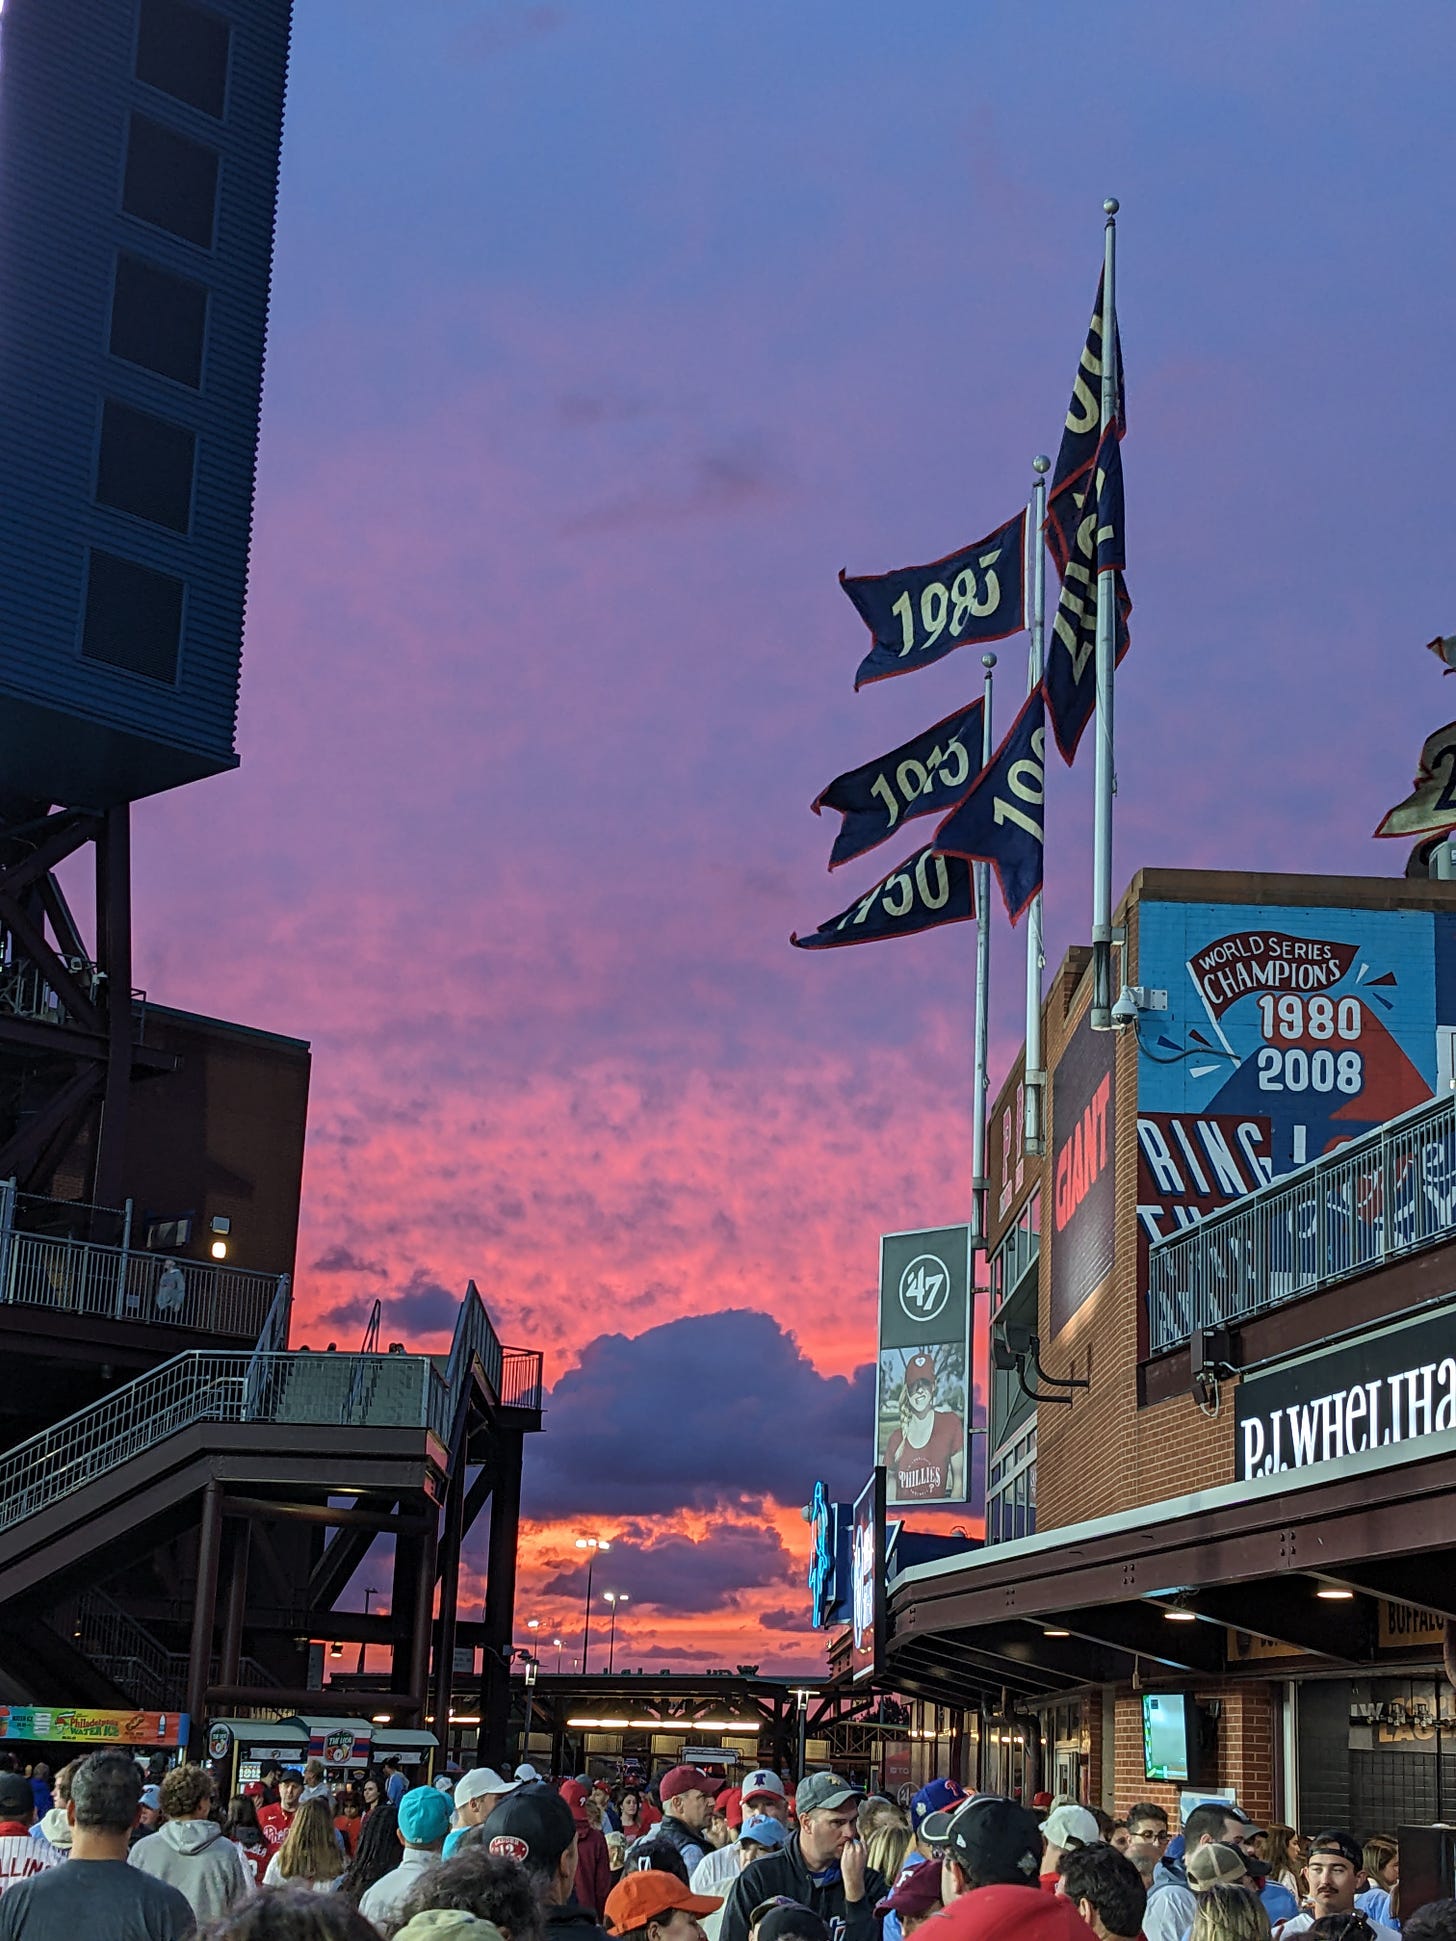 A dramatic sunset, fading from purple-blue to pink, is framed by rippling flags representing the years the Philadelphia Phillies won the pennant. In the foreground, a crowd of baseball fans.